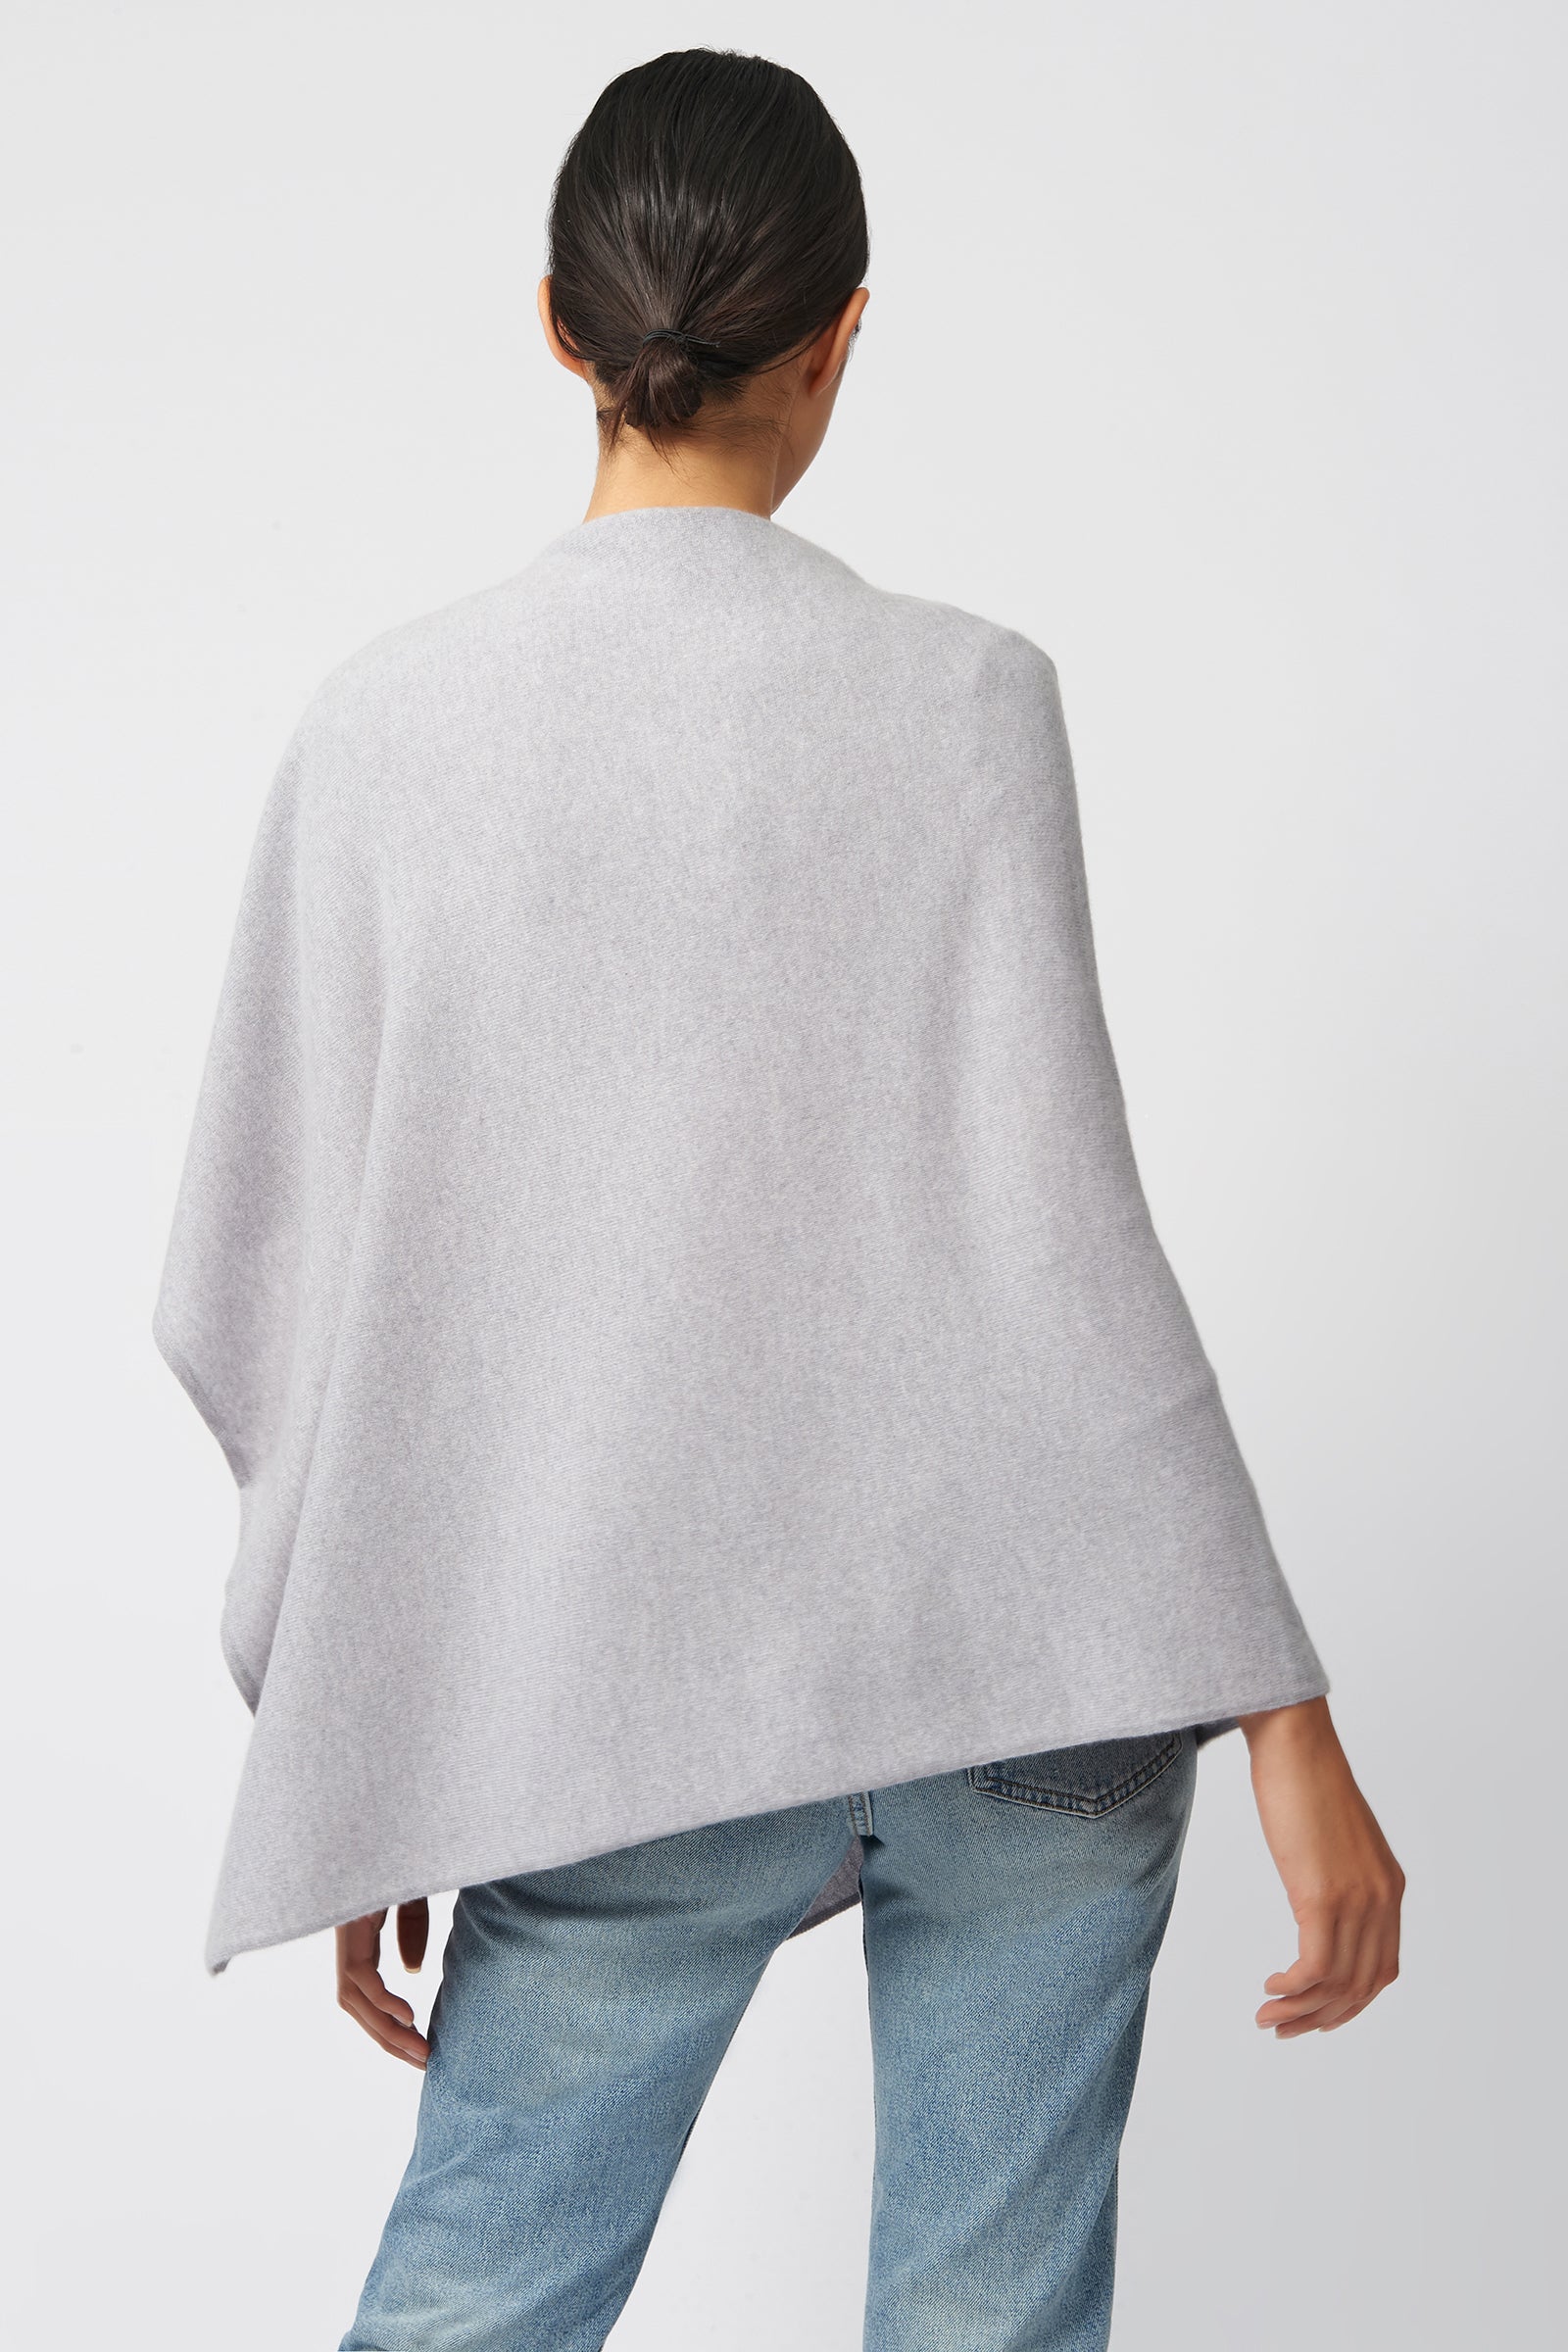 Kal Rieman Cashmere Poncho in Grey Heather on Model Back View